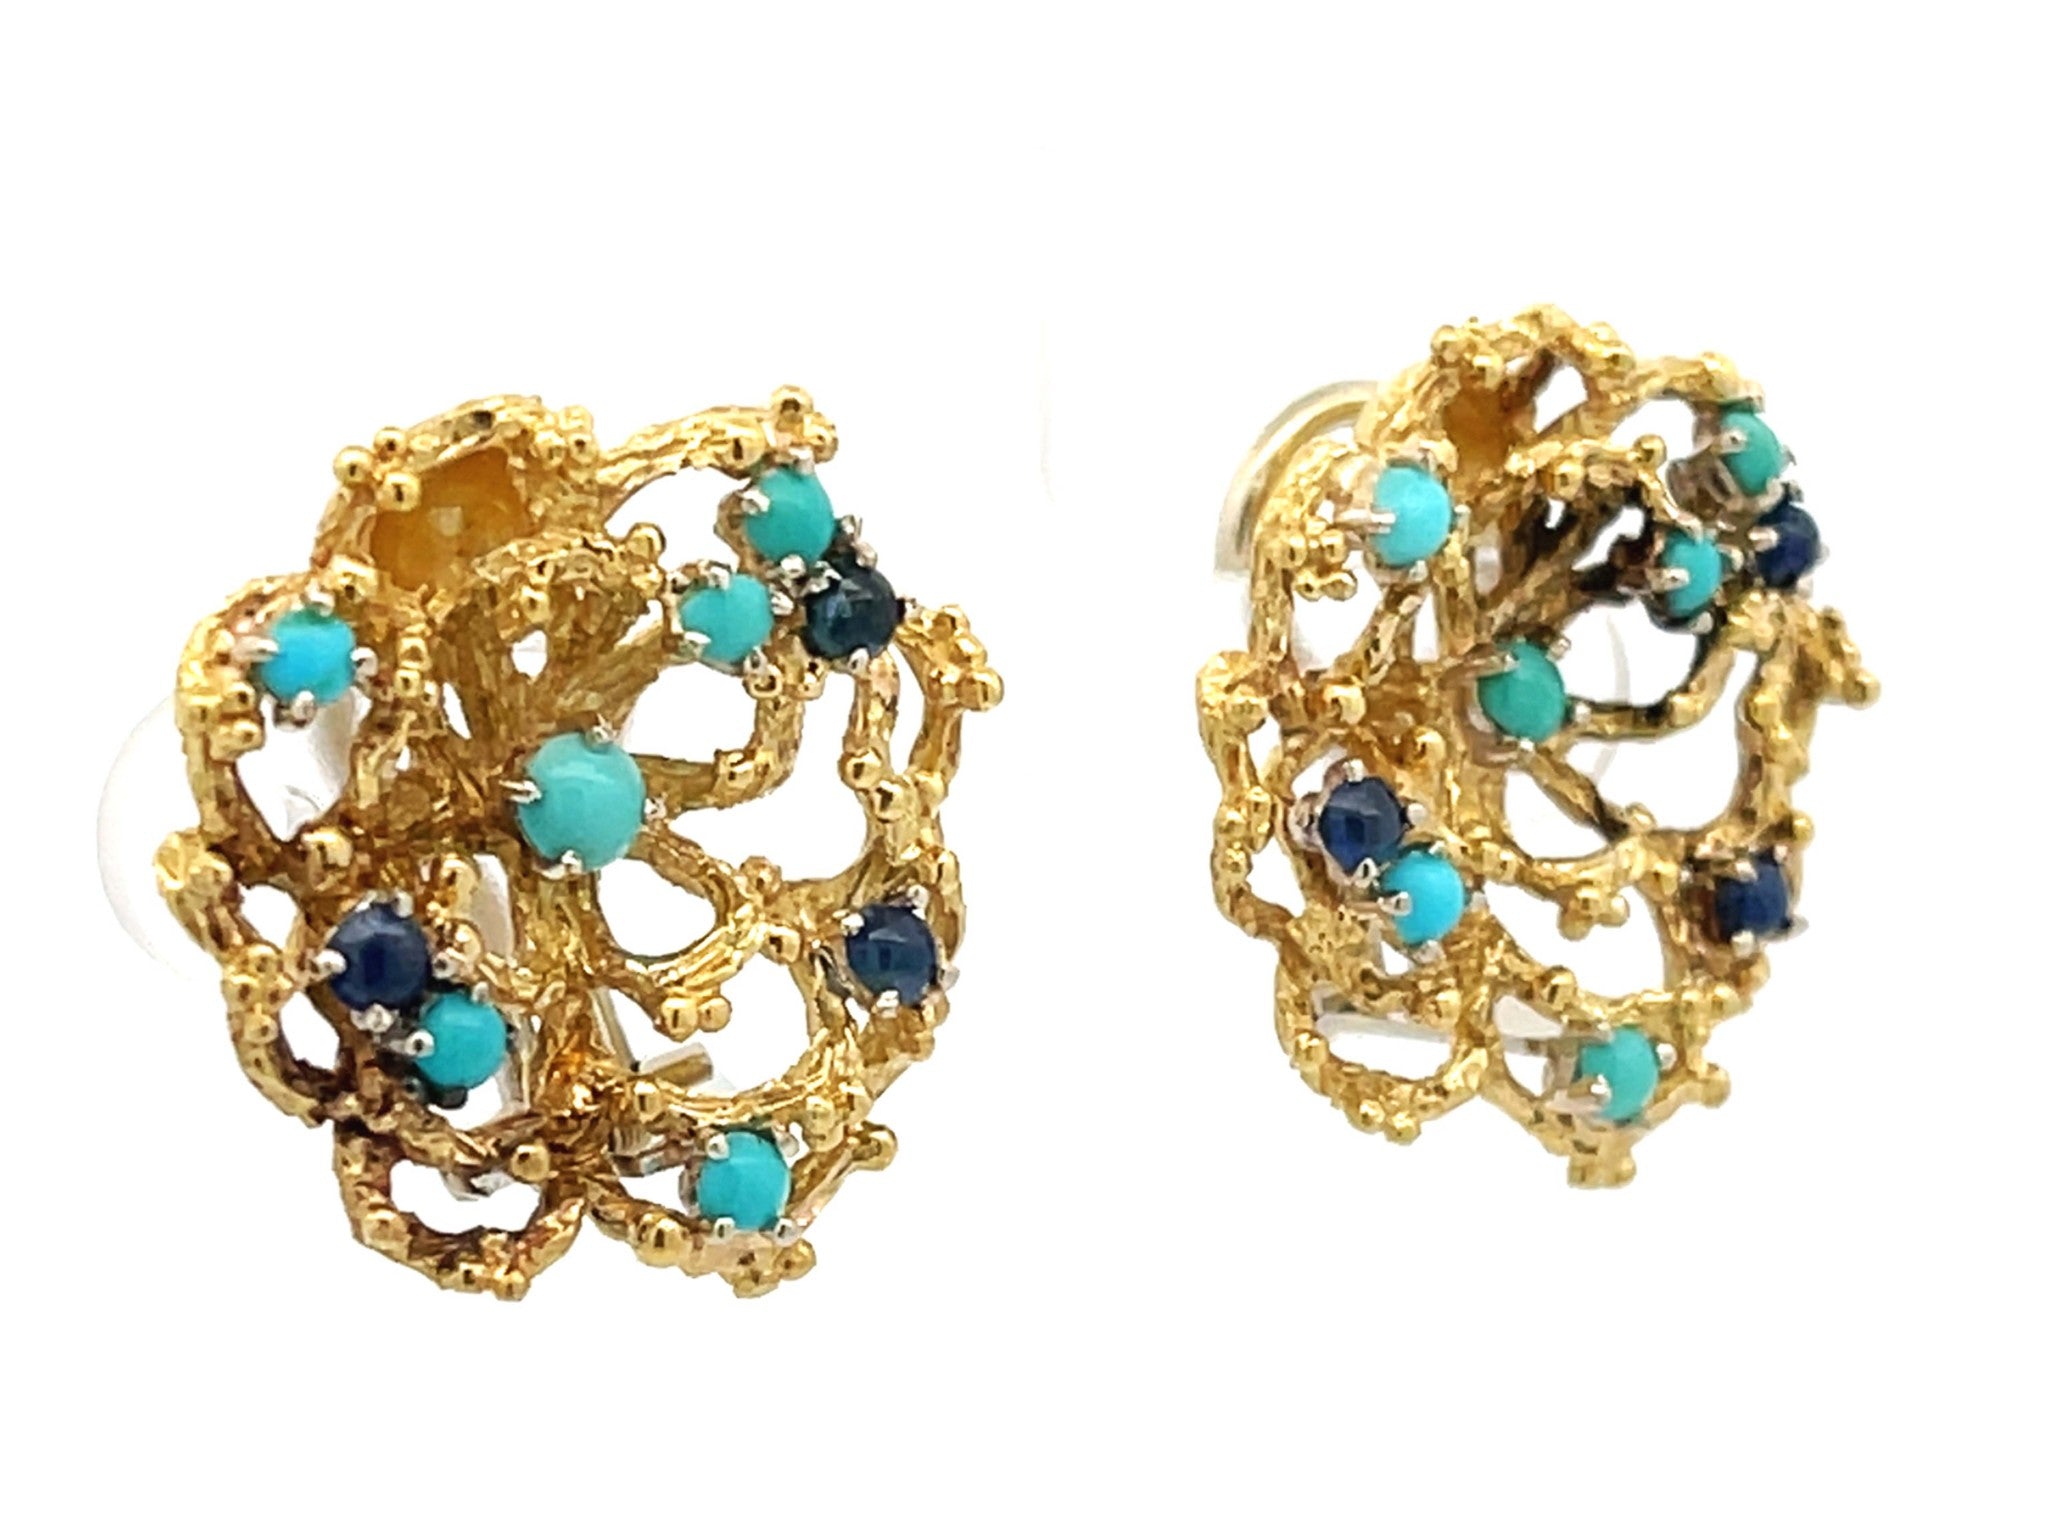 Wavy Flower Earrings with Cabochon Sapphires and Turquoises in 18K Yellow Gold